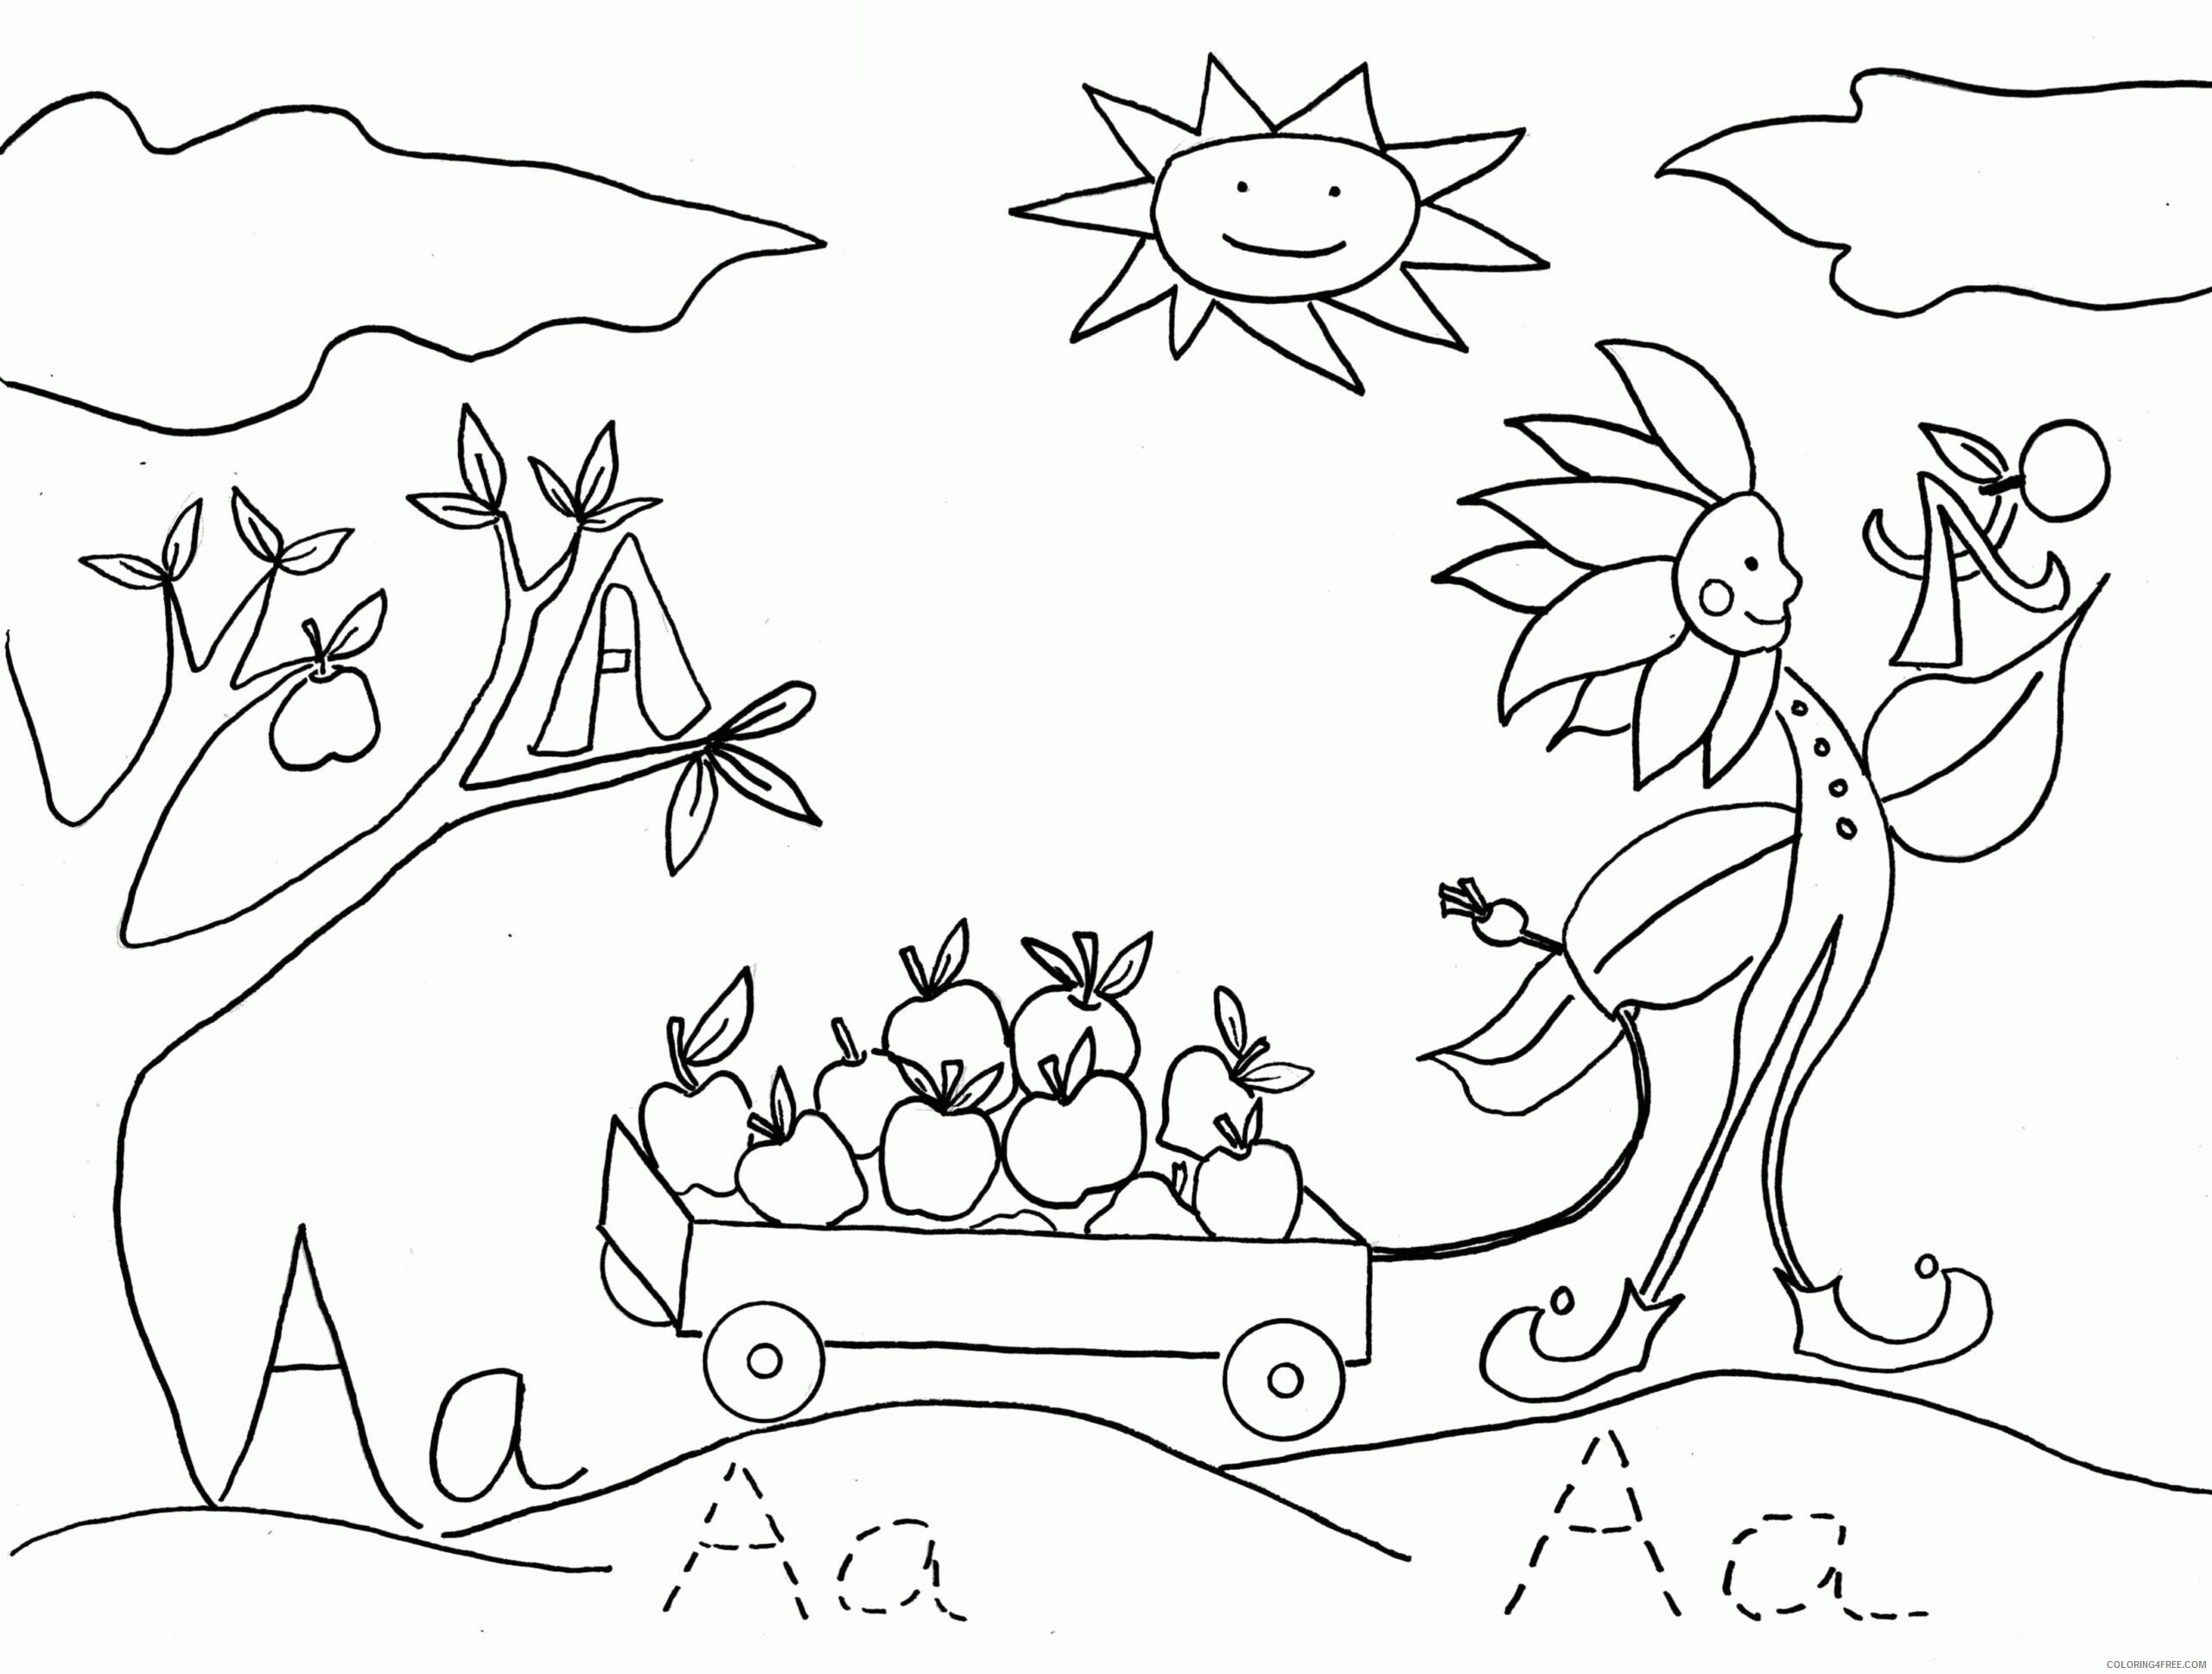 A Coloring Pages Printable Sheets Tag Archive for pages 2021 a 0218 Coloring4free